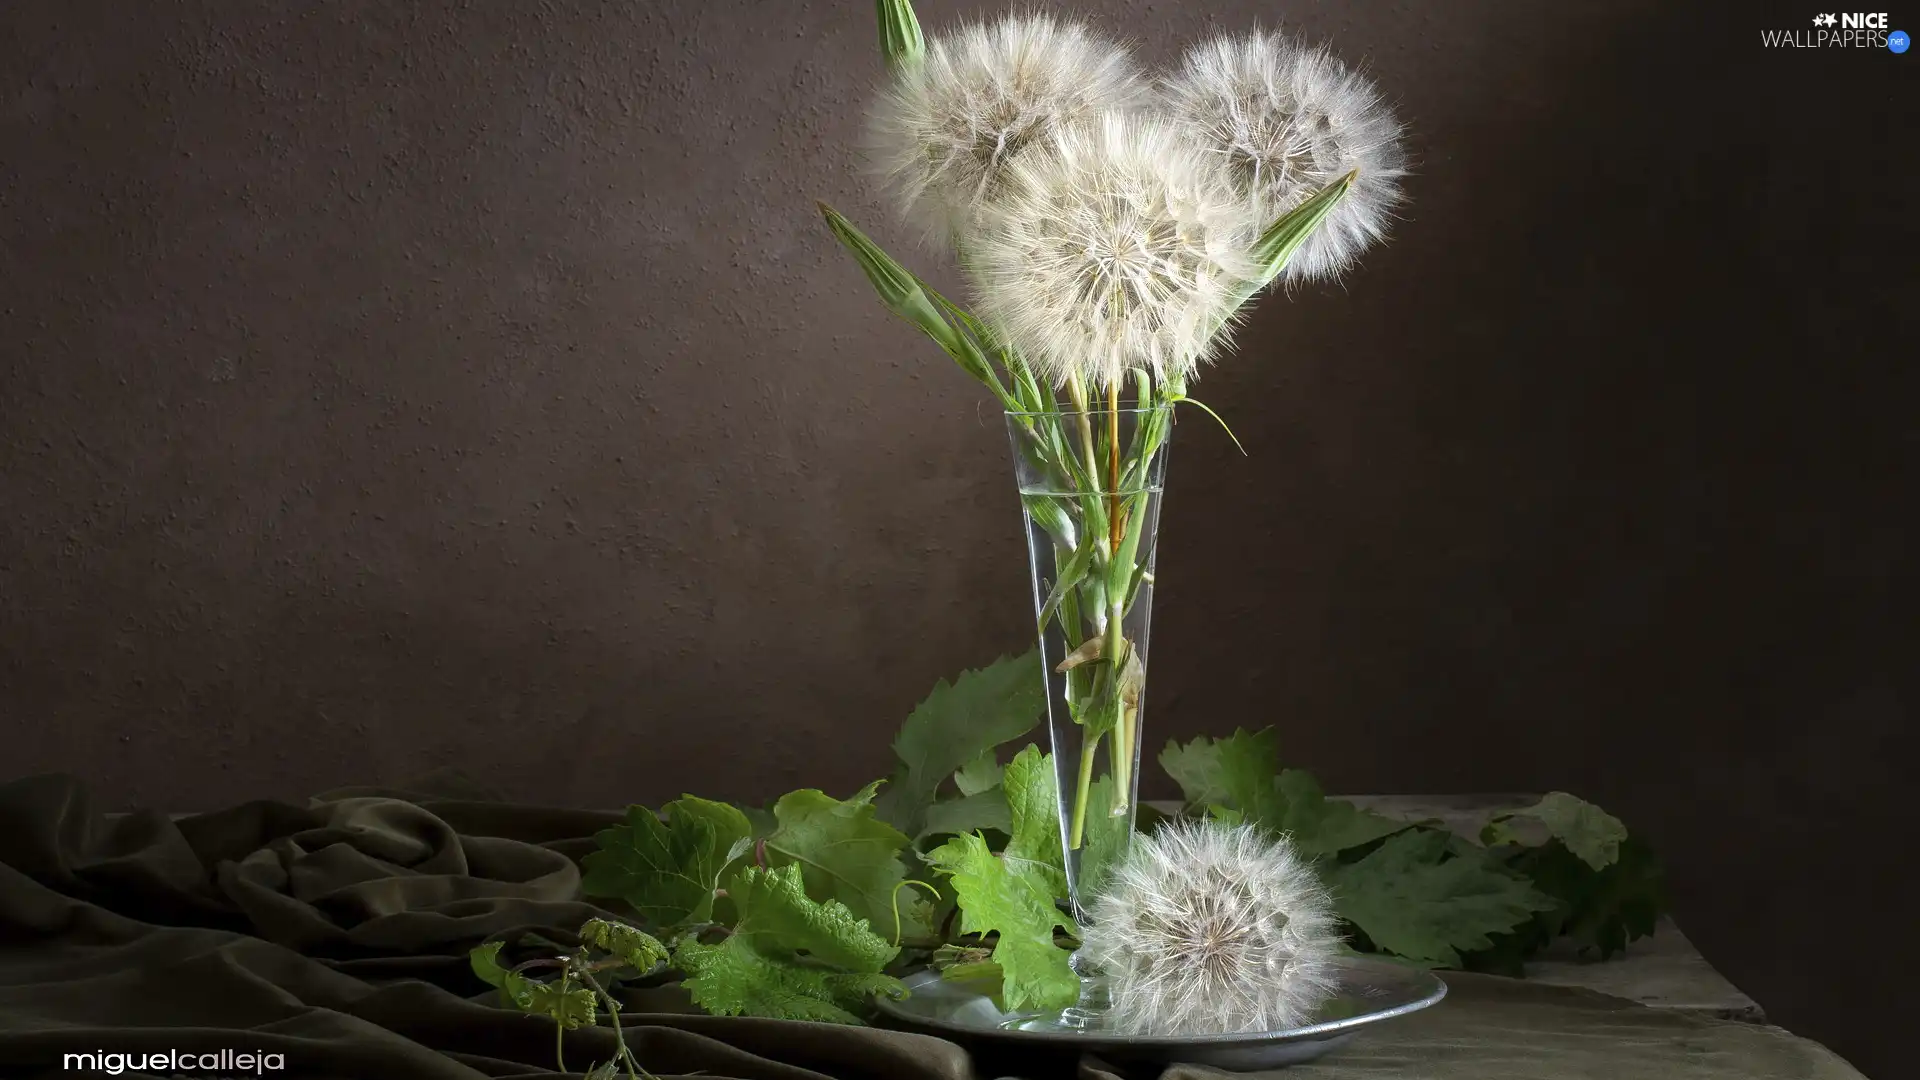 Vase, puffball, Leaf, glass, dandelions, green ones, composition